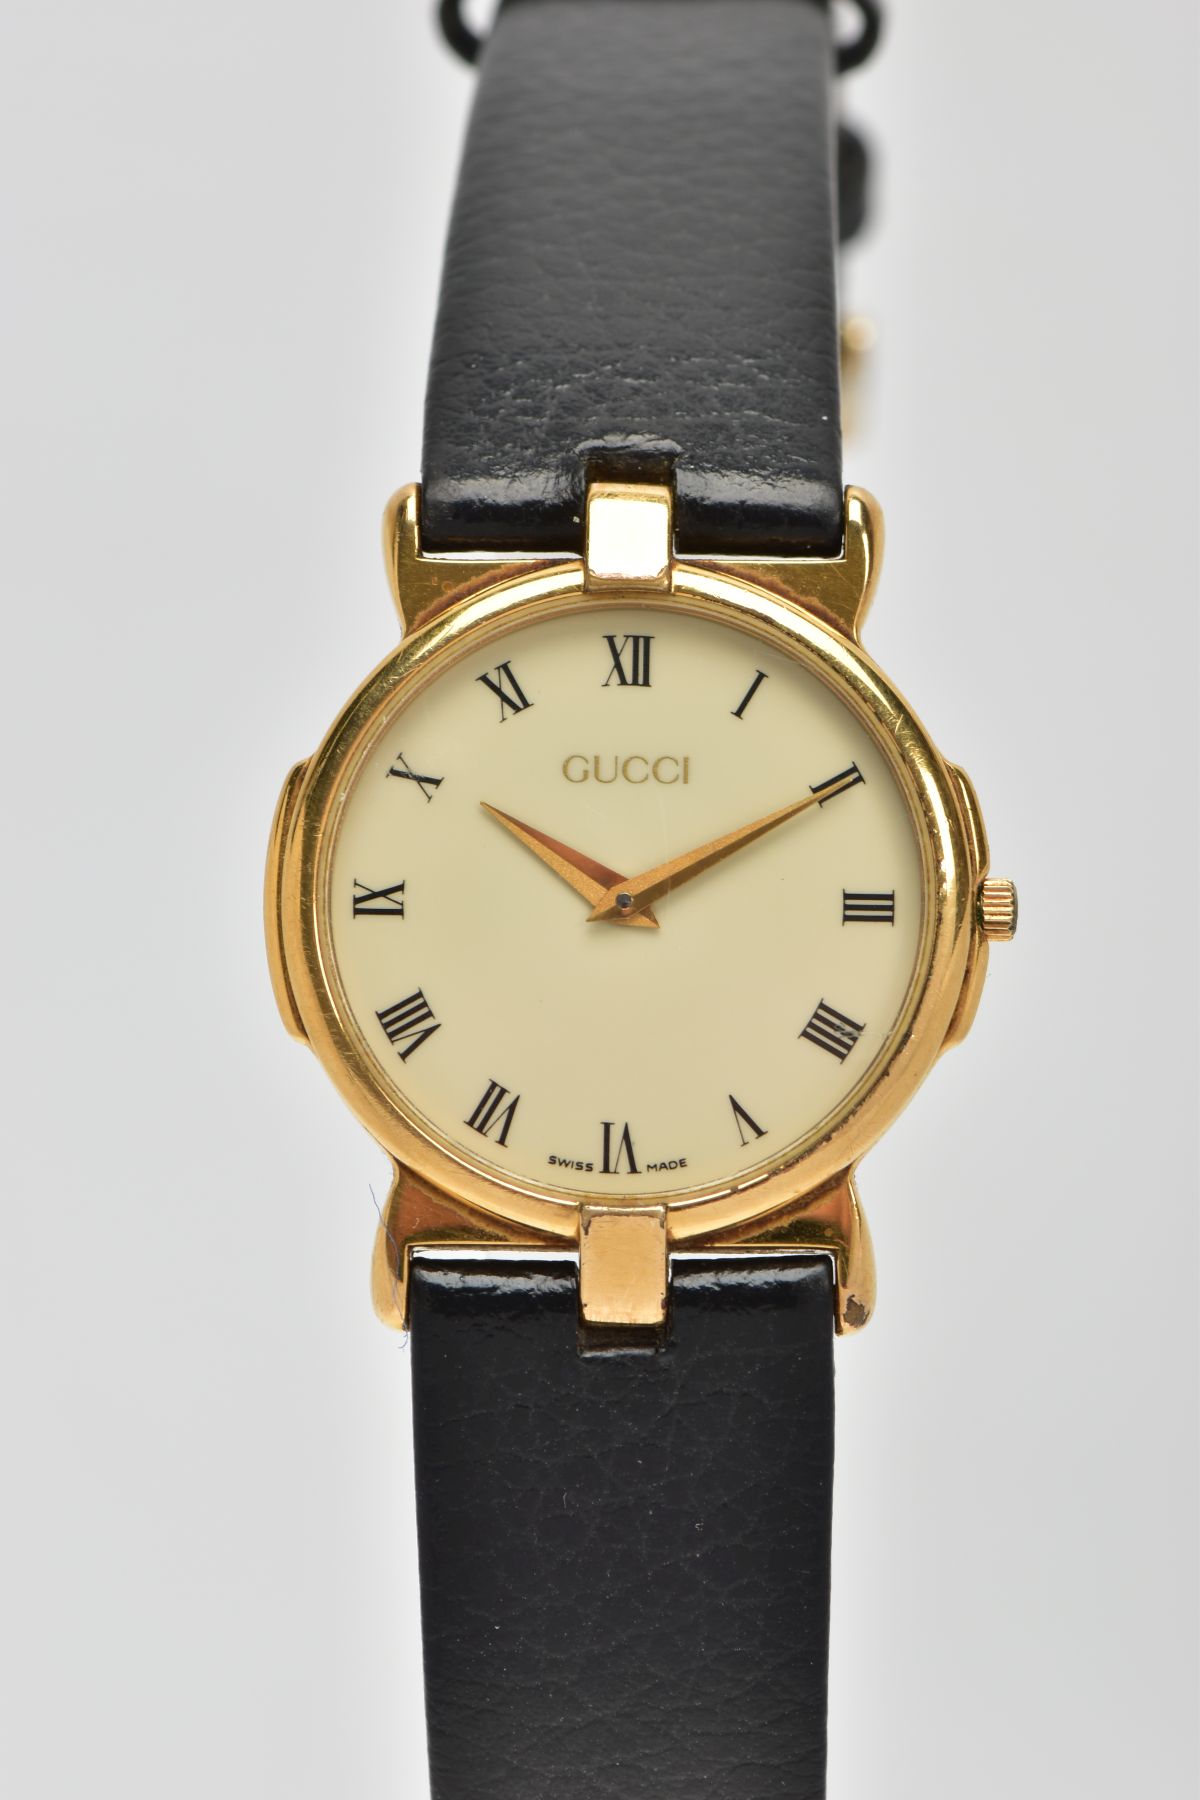 A GENTS 'GUCCI' WRISTWATCH, round cream dial signed 'Gucci', Roman numerals, gold tone hands, within